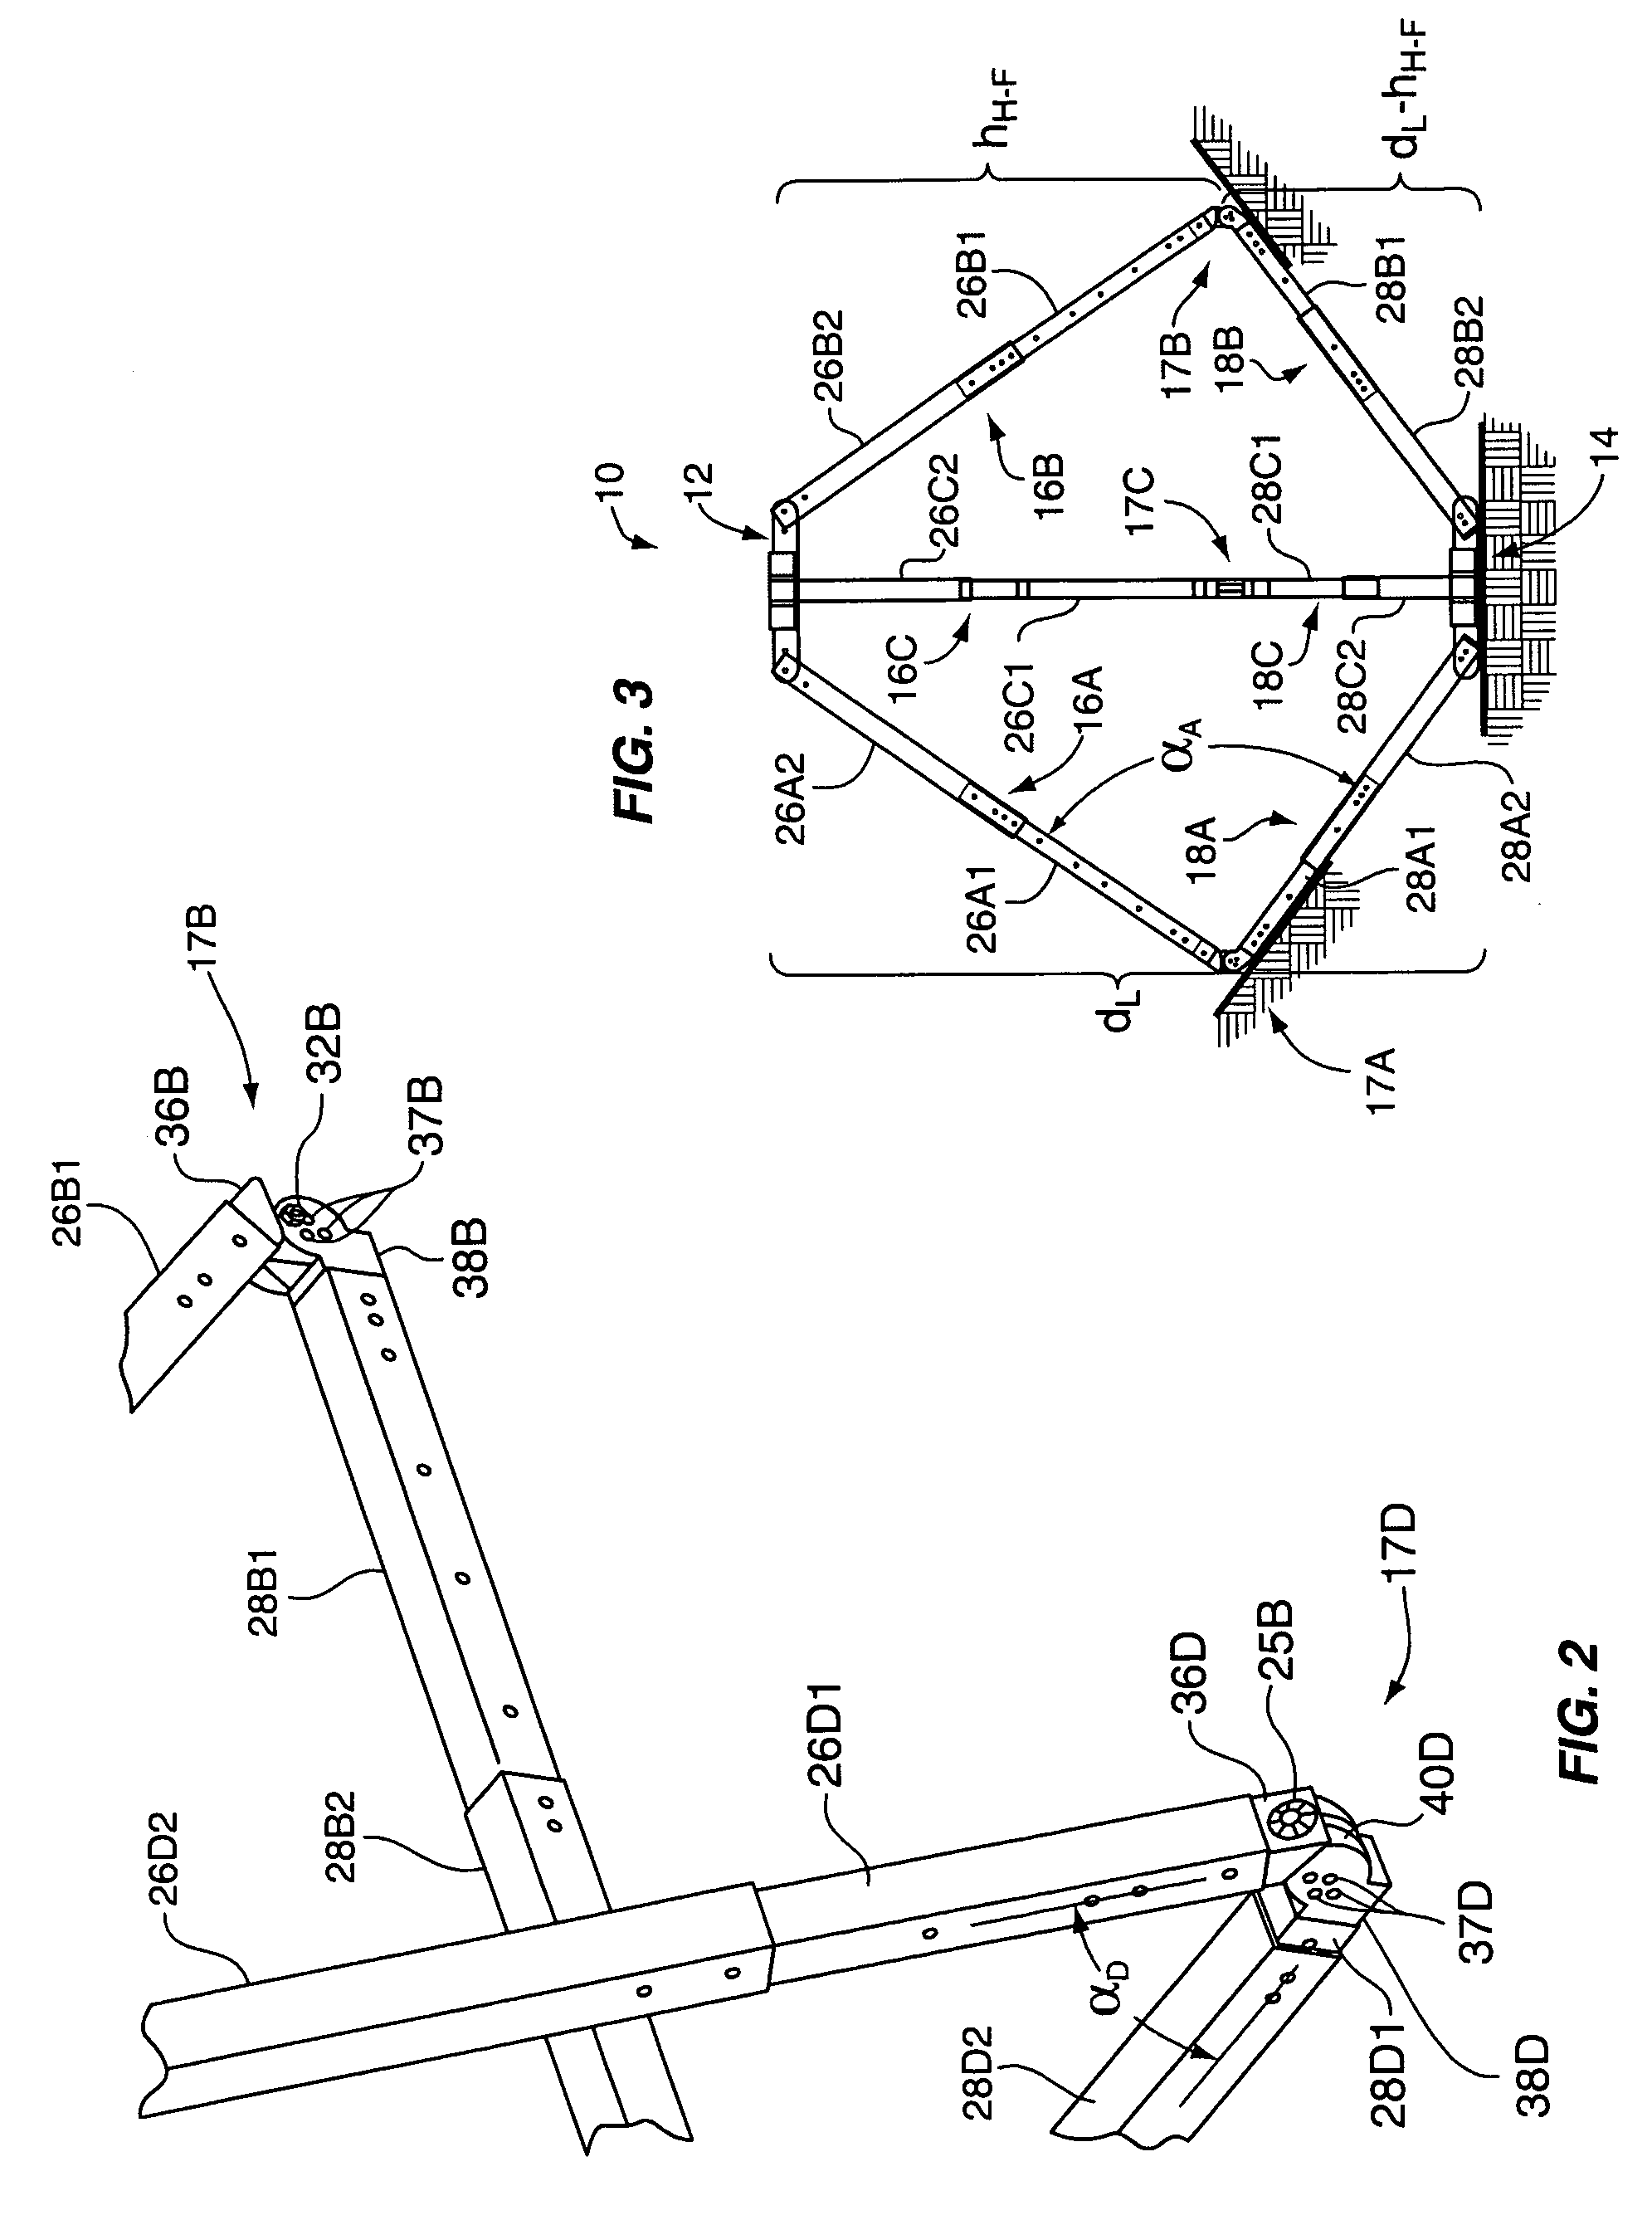 Multi-purpose upright support stand with leg assemblies having hinge-fitting